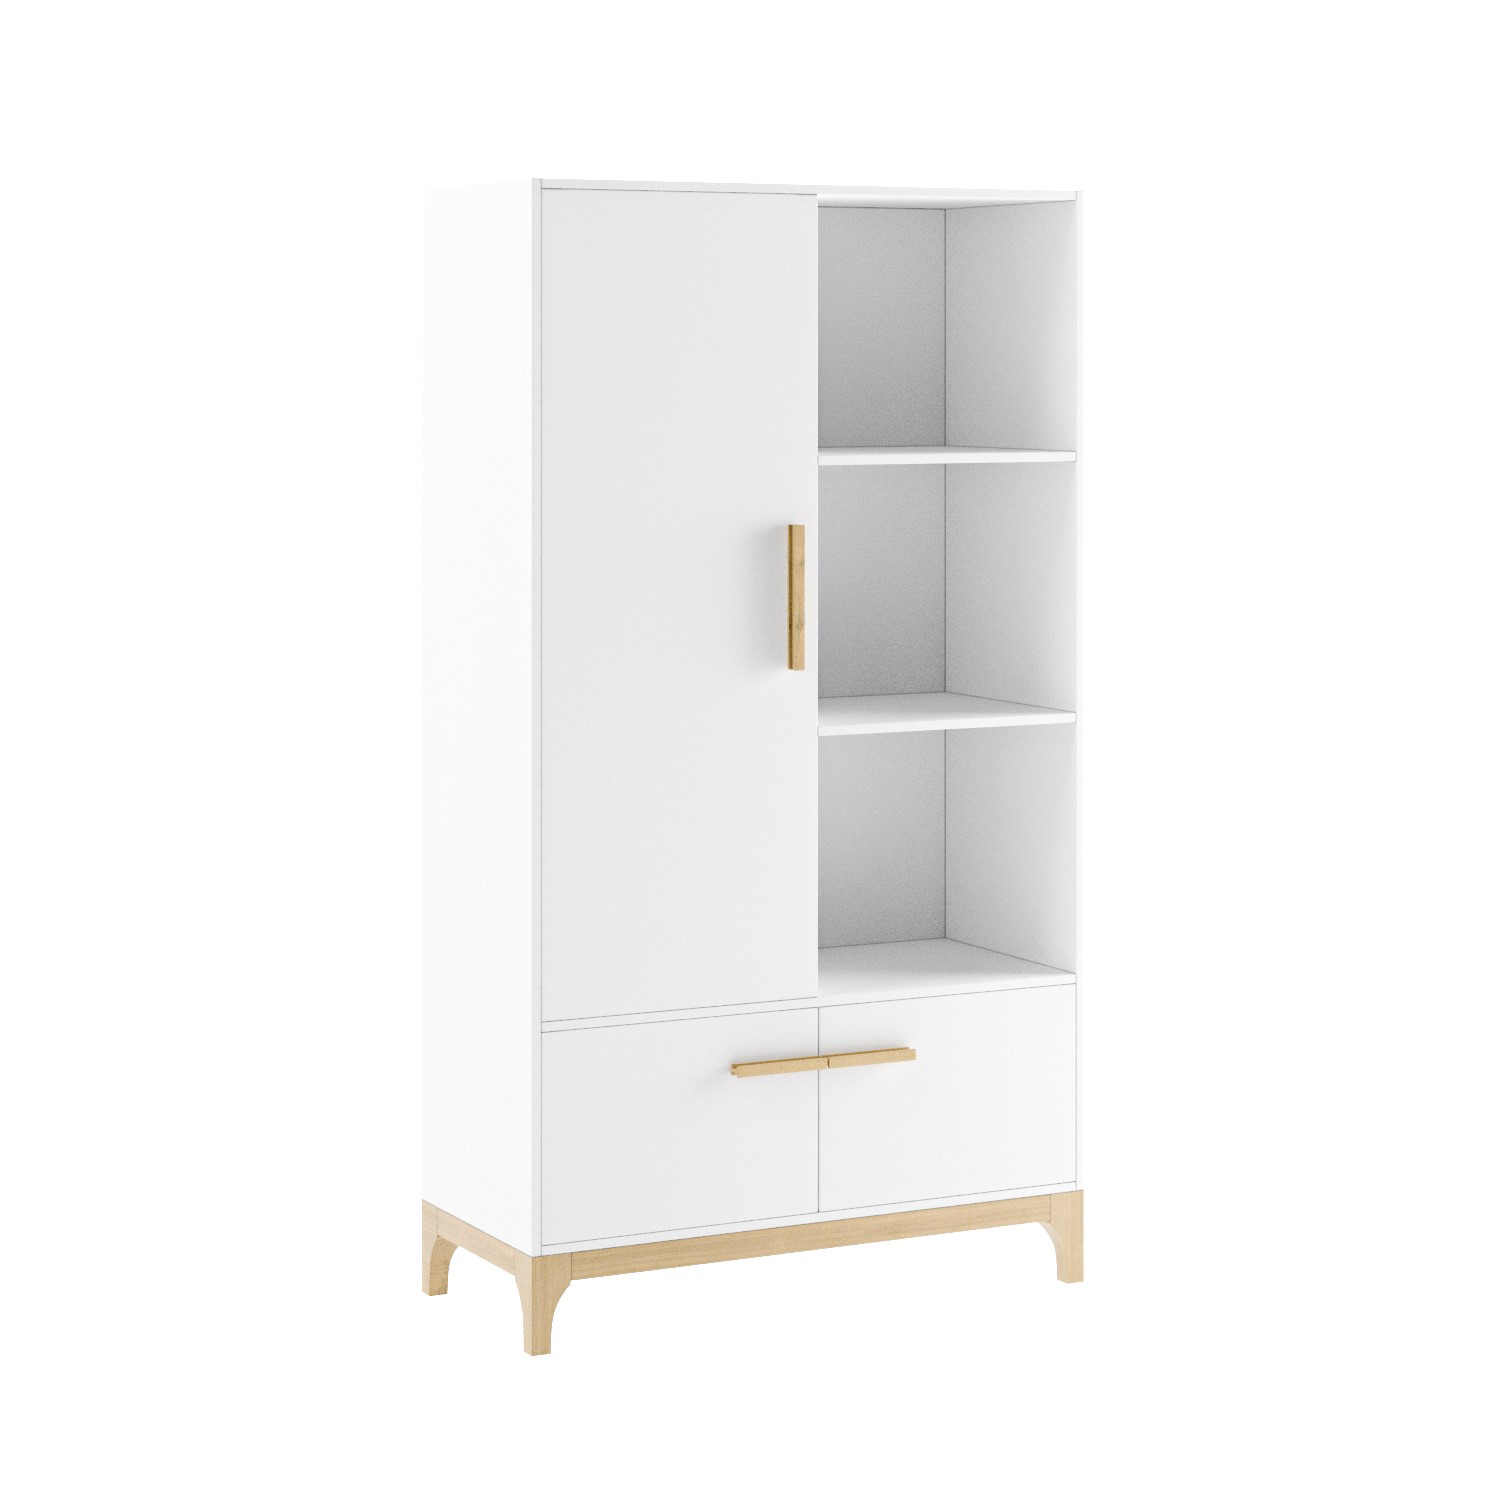 Read more about Nursery wardrobe with shelves in white and wood rue